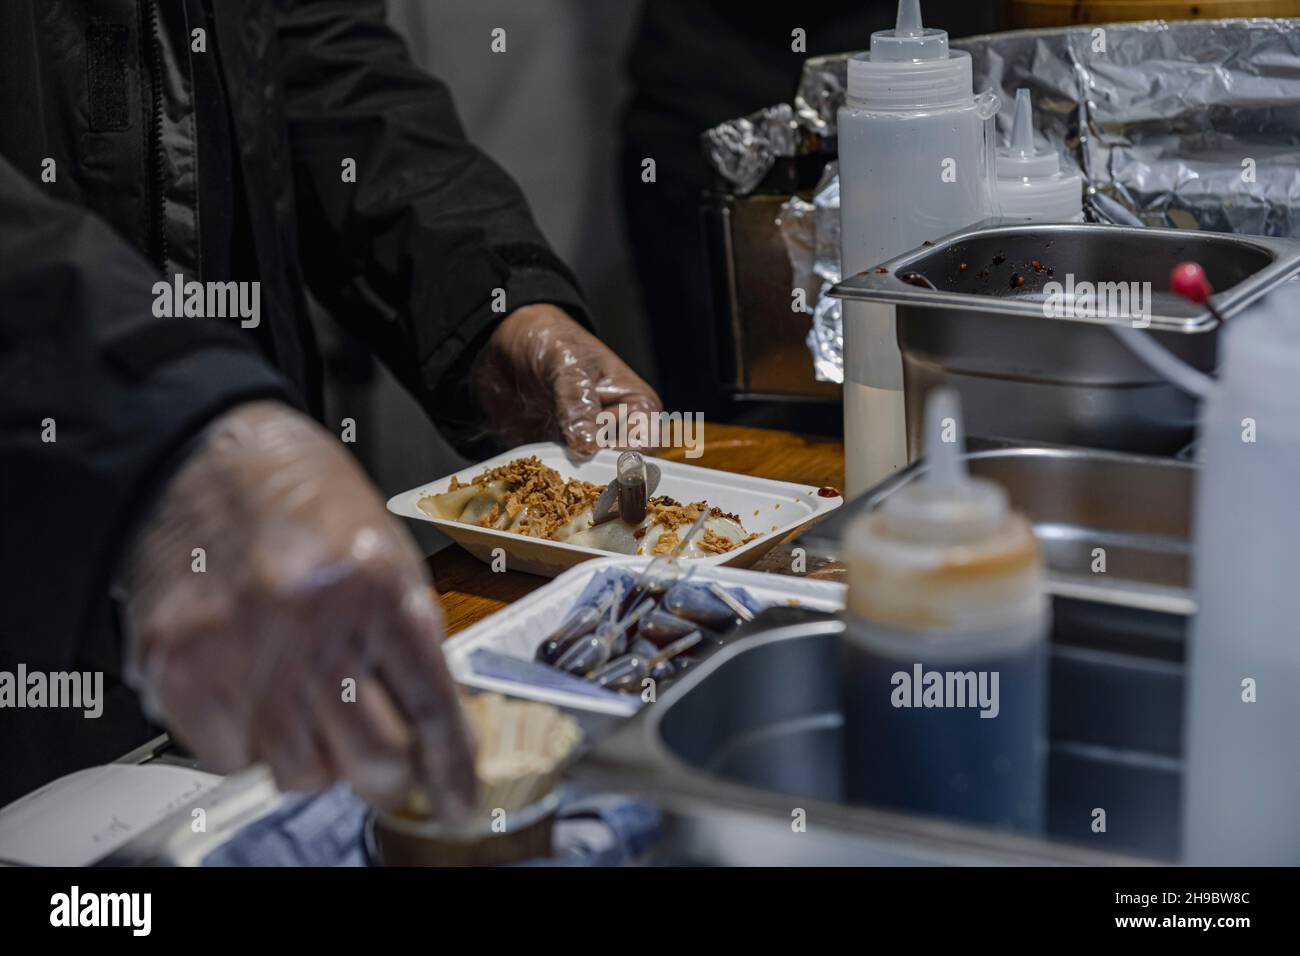 A streetfood stall Gyoza Guys by Amir Pem at Maltby Street Market in London on a Saturday morning Stock Photo